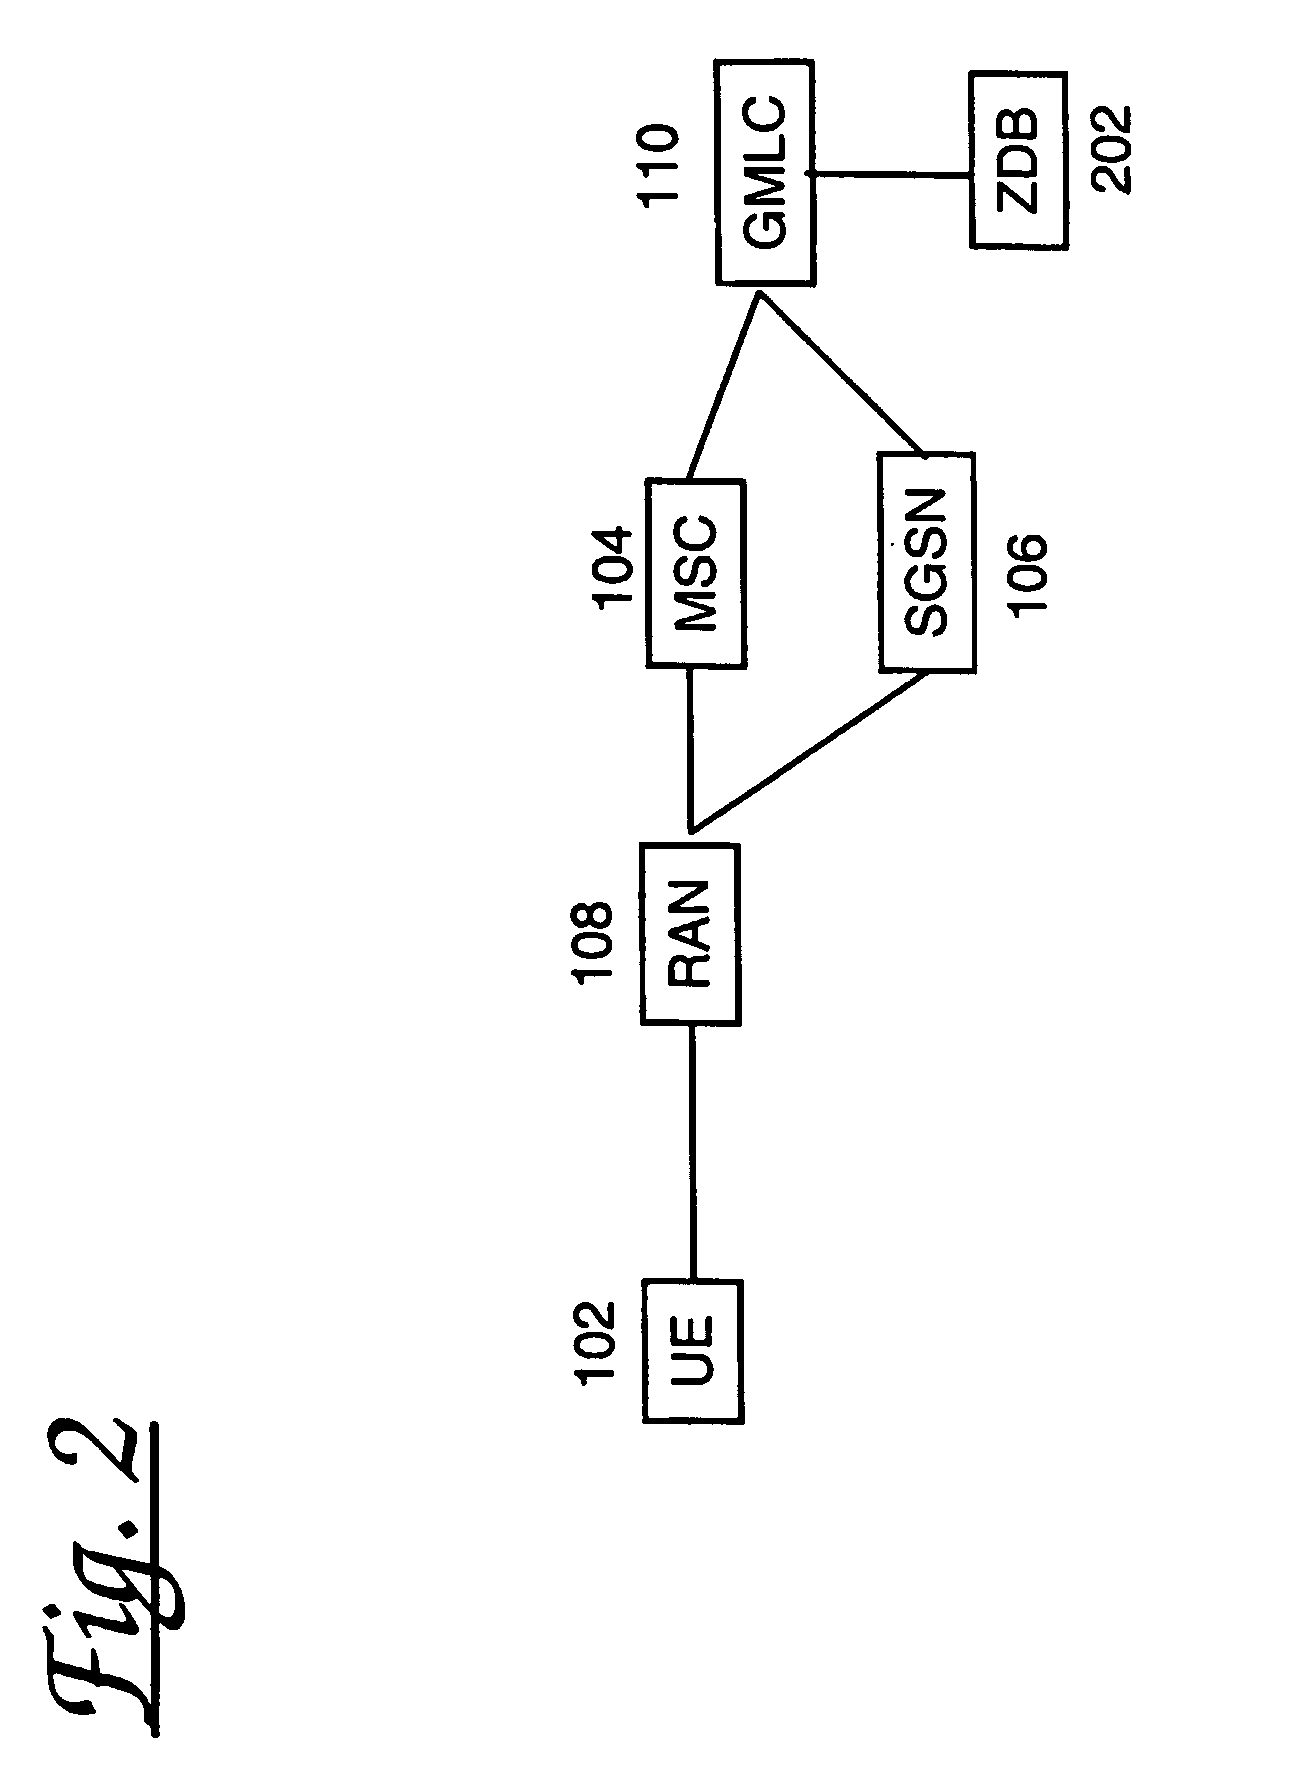 Method of call routing